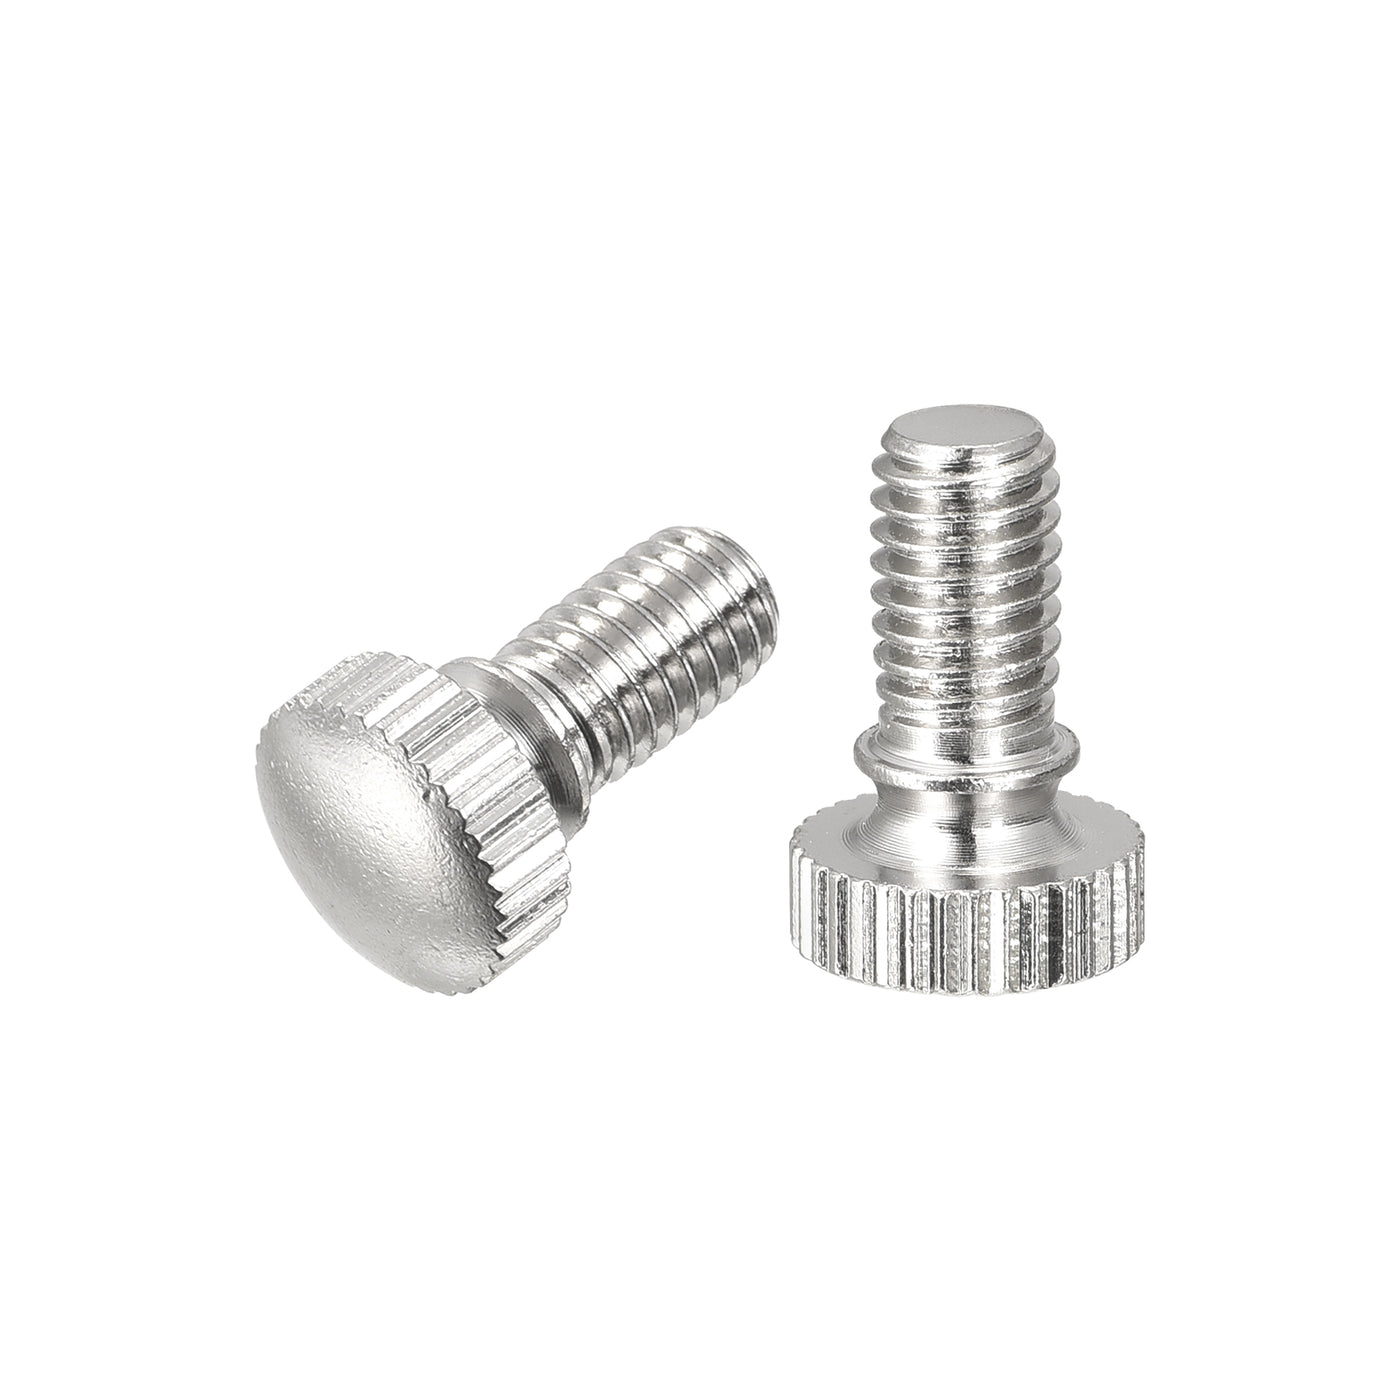 uxcell Uxcell Knurled Thumb Screws, M6x10mm Brass Shoulder Bolts Grip Knobs Fasteners, Nickel Plated 2Pcs